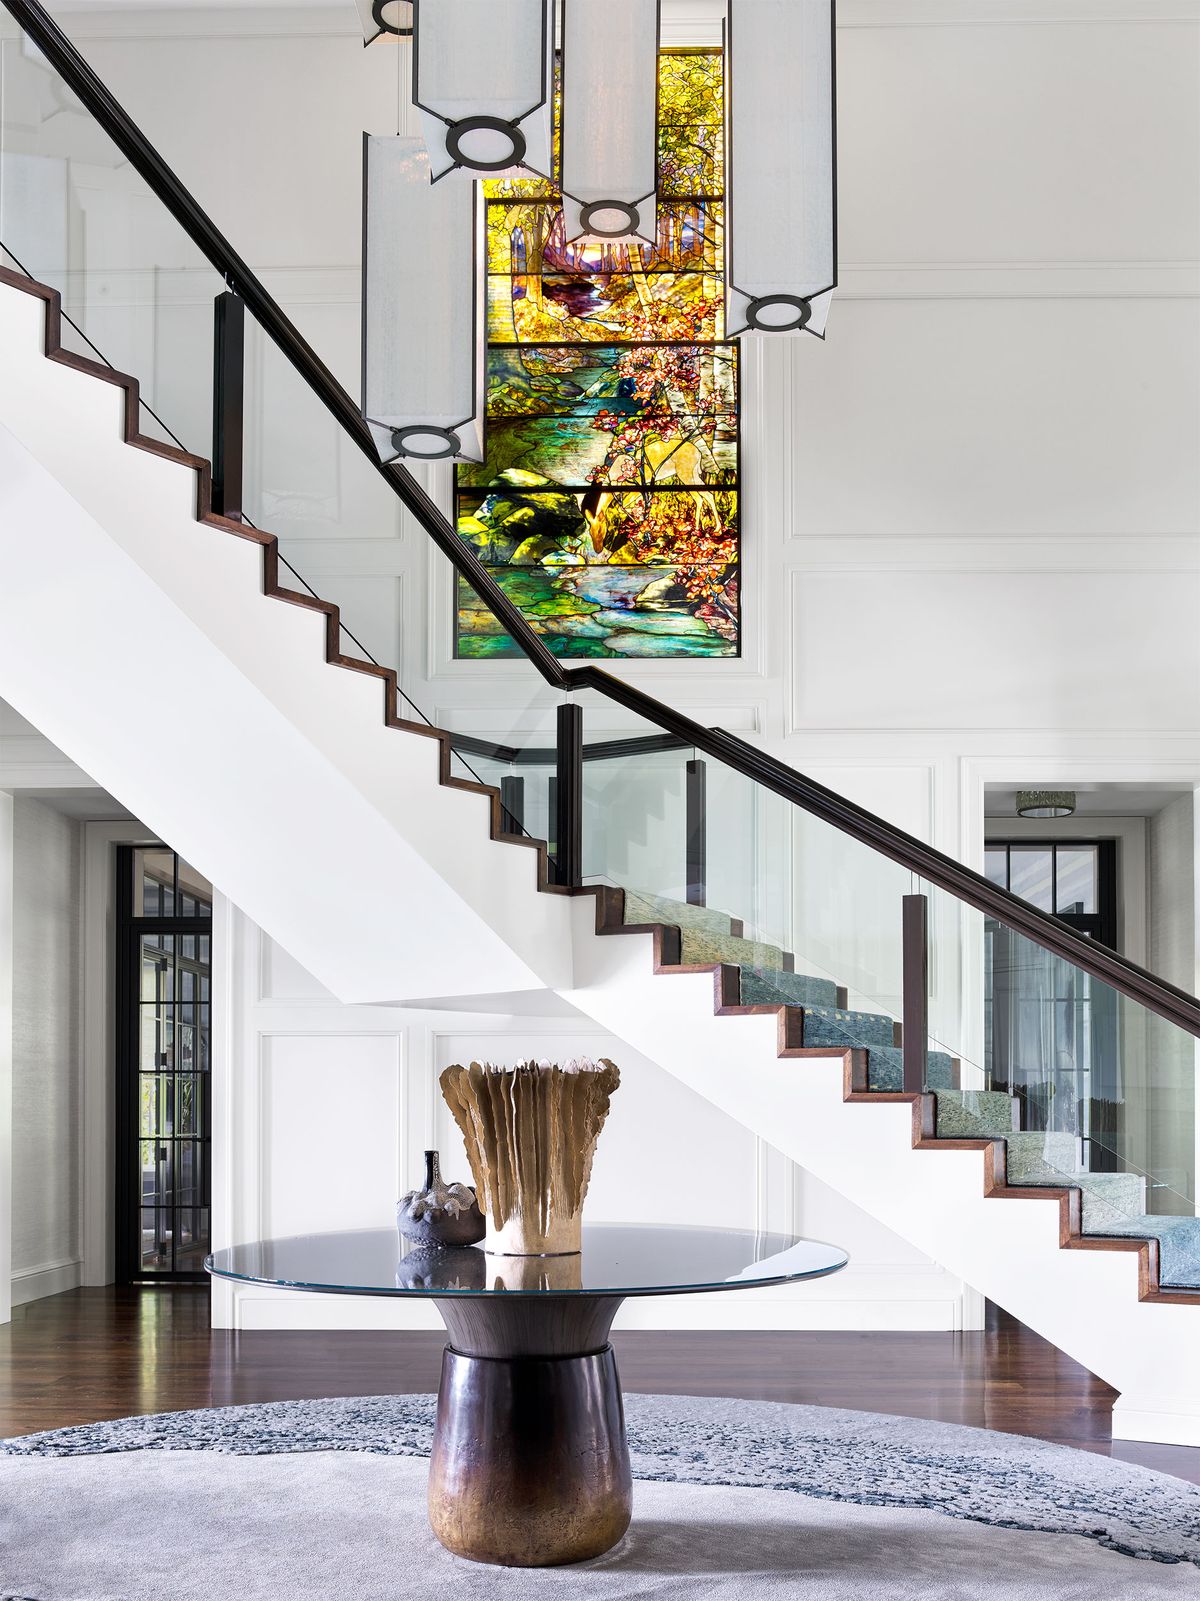 a tiffany studios landscape window overlooks a staircase with glass balustrade and a round glass topped table in foreground